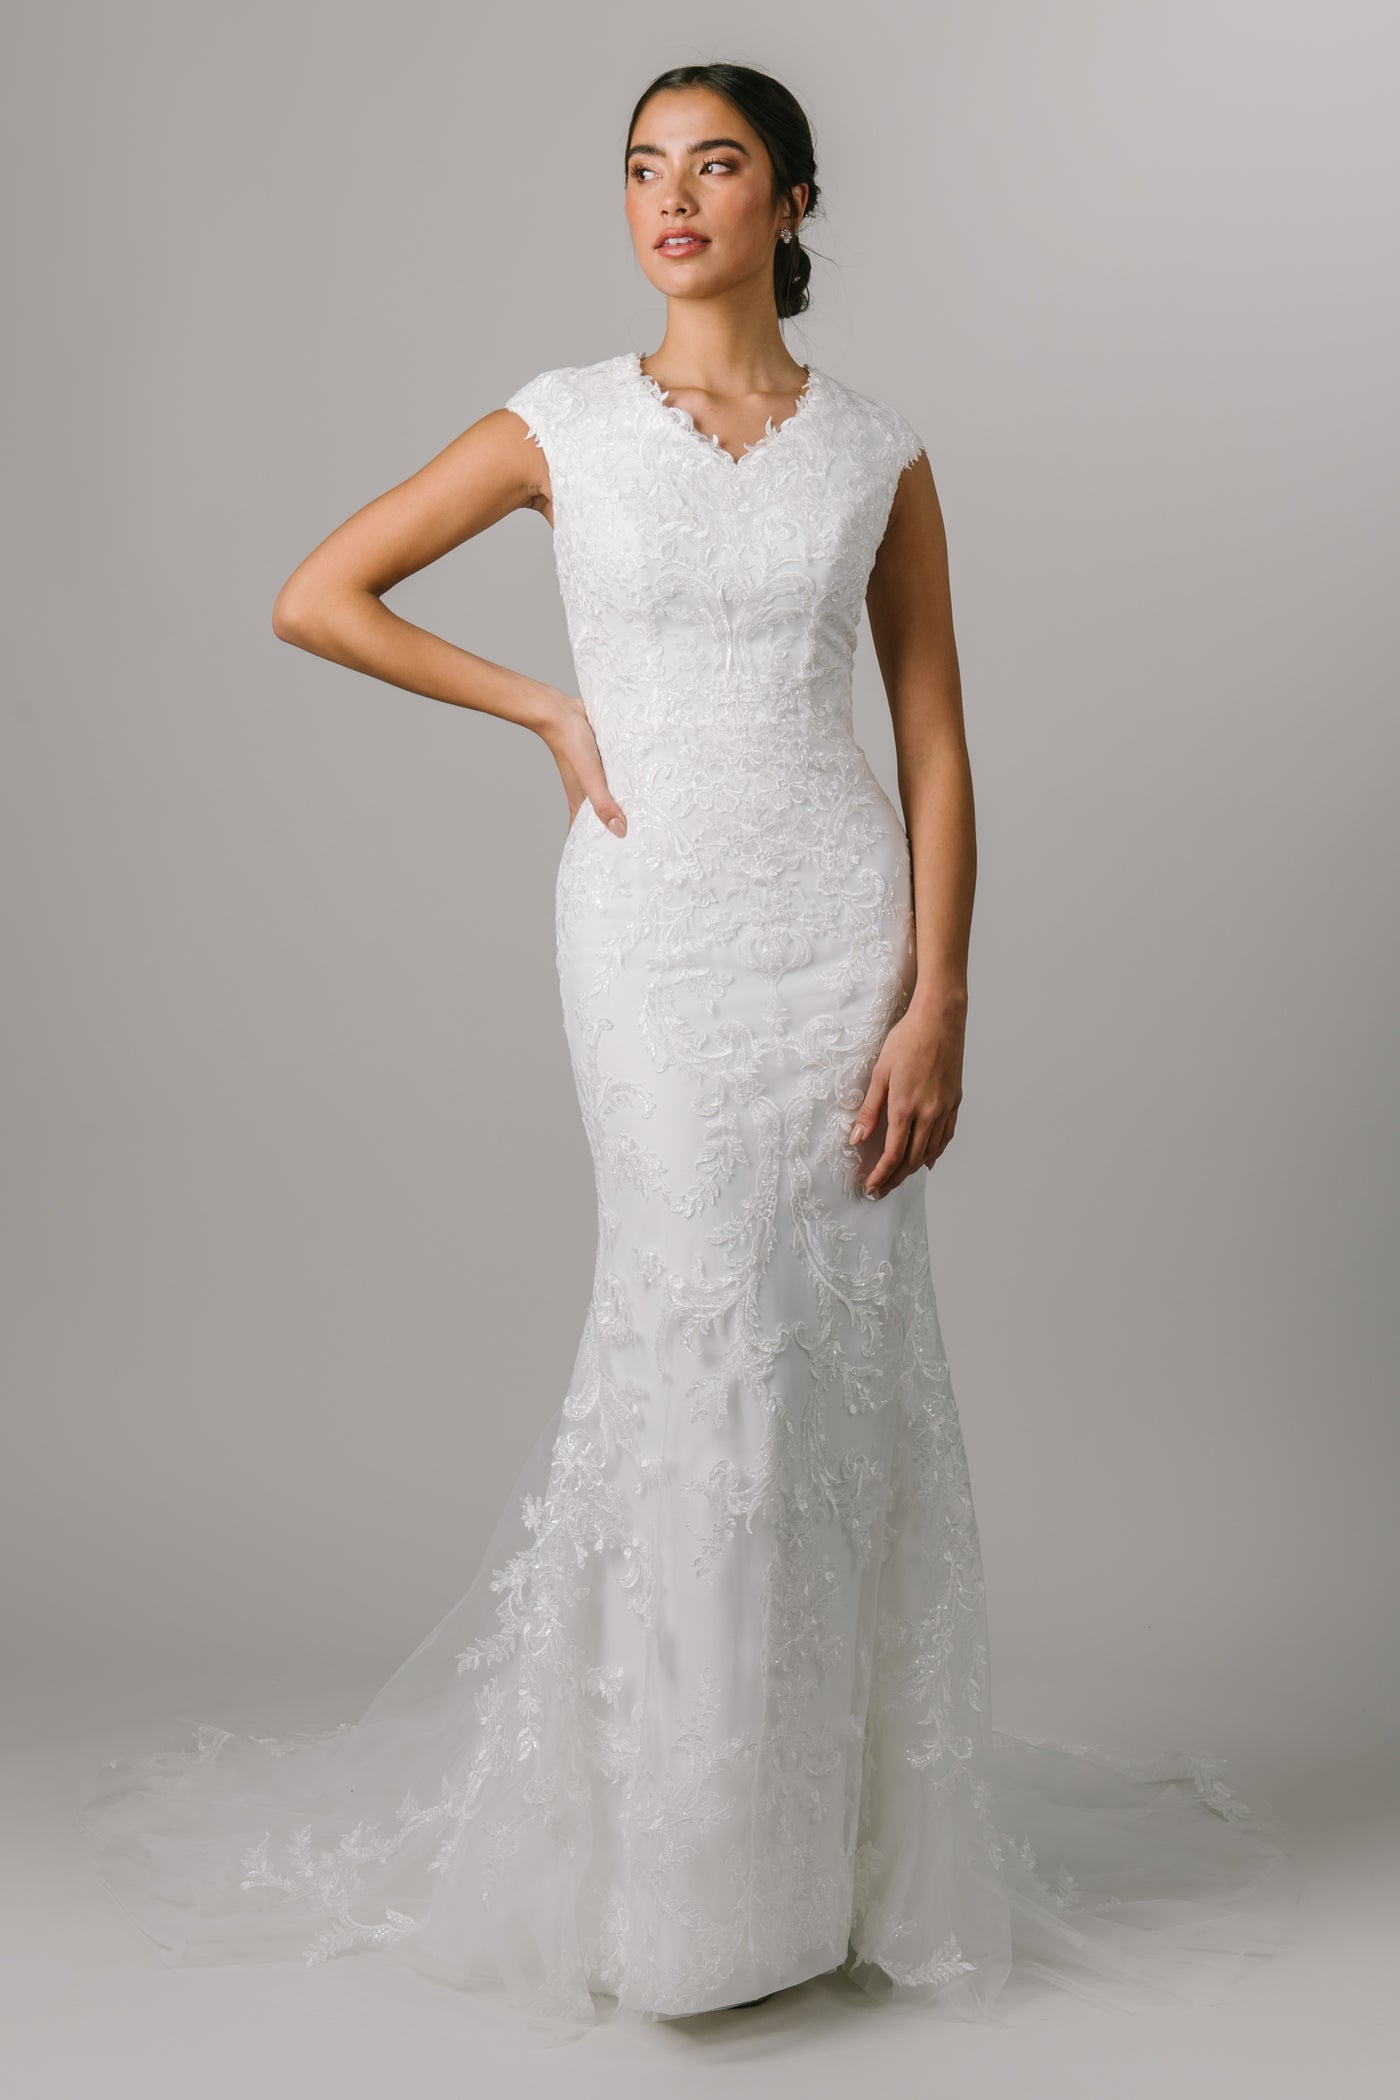 This fitted Modest Wedding Dress shows off with a V-neck, fitted silhouette and sparkle lace. - Modest Wedding Dress - Modest Clothing -  LatterDayBride